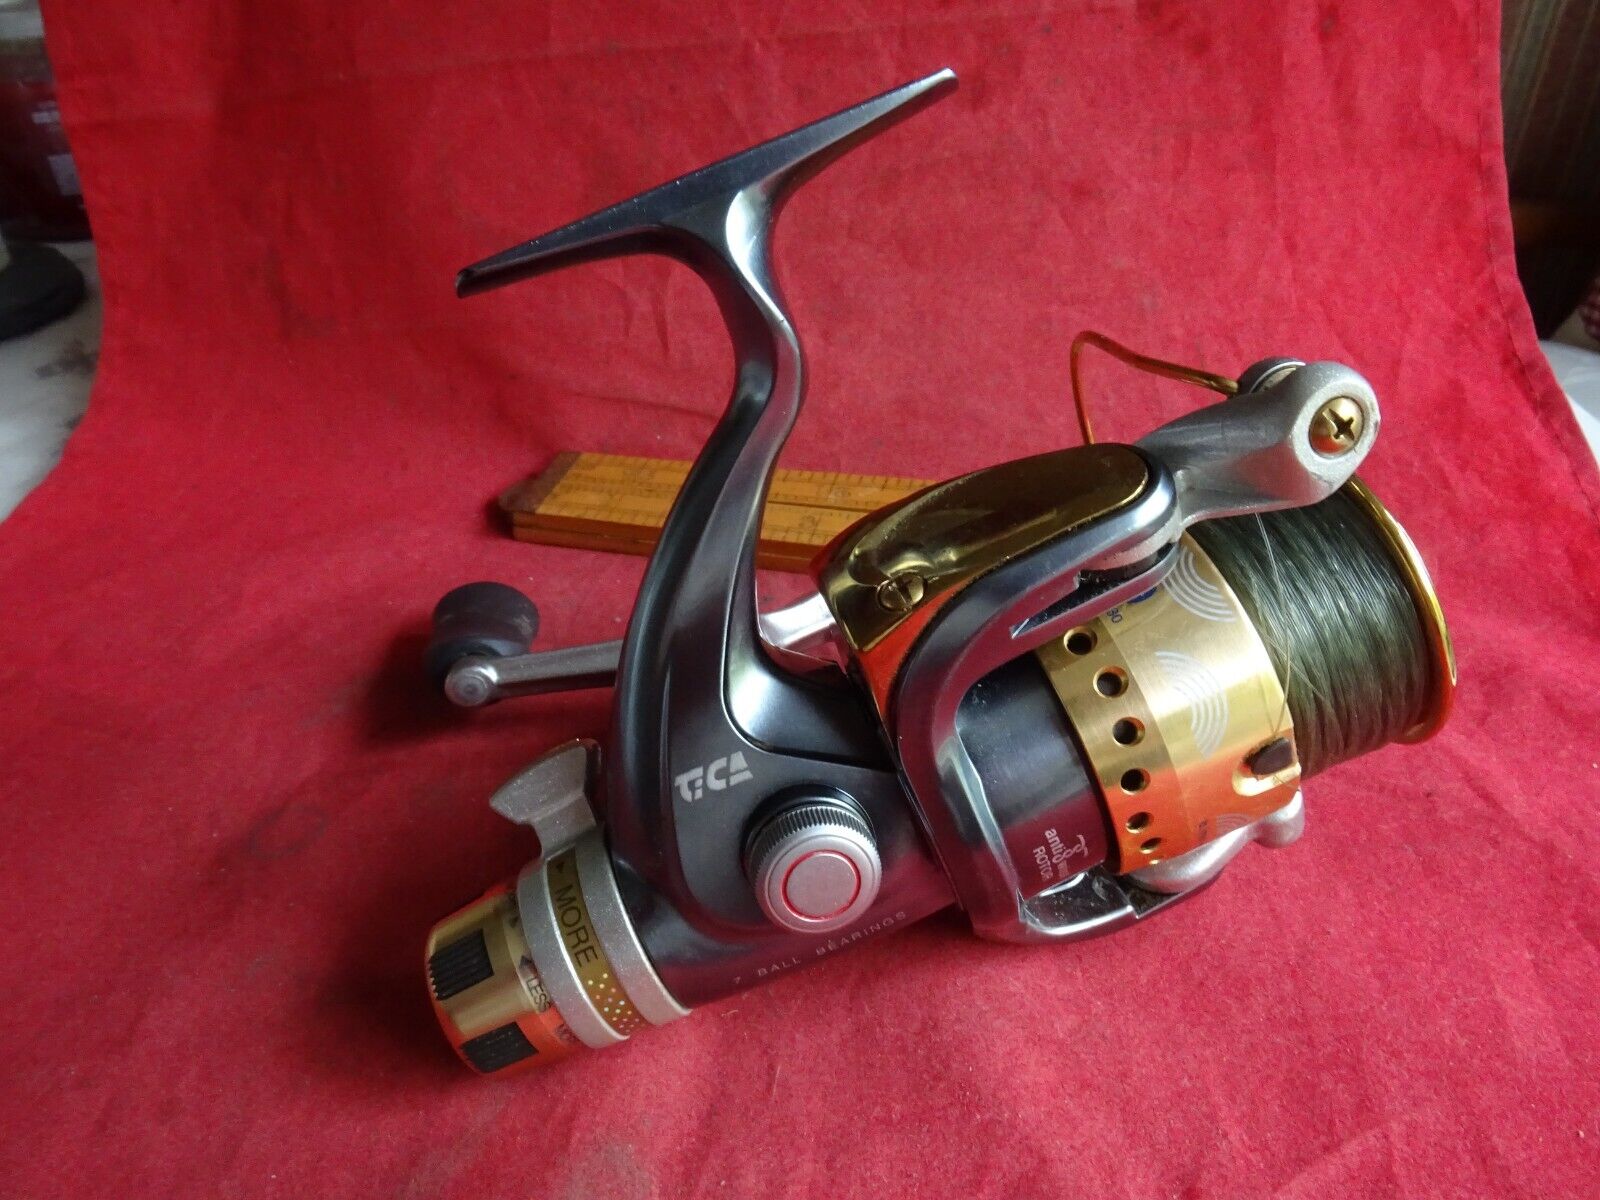 A VERY GOOD LIGHTLY USED TICA SD3559 SPINNING/MATCH REEL REEL WITH FIGHTING DRAG